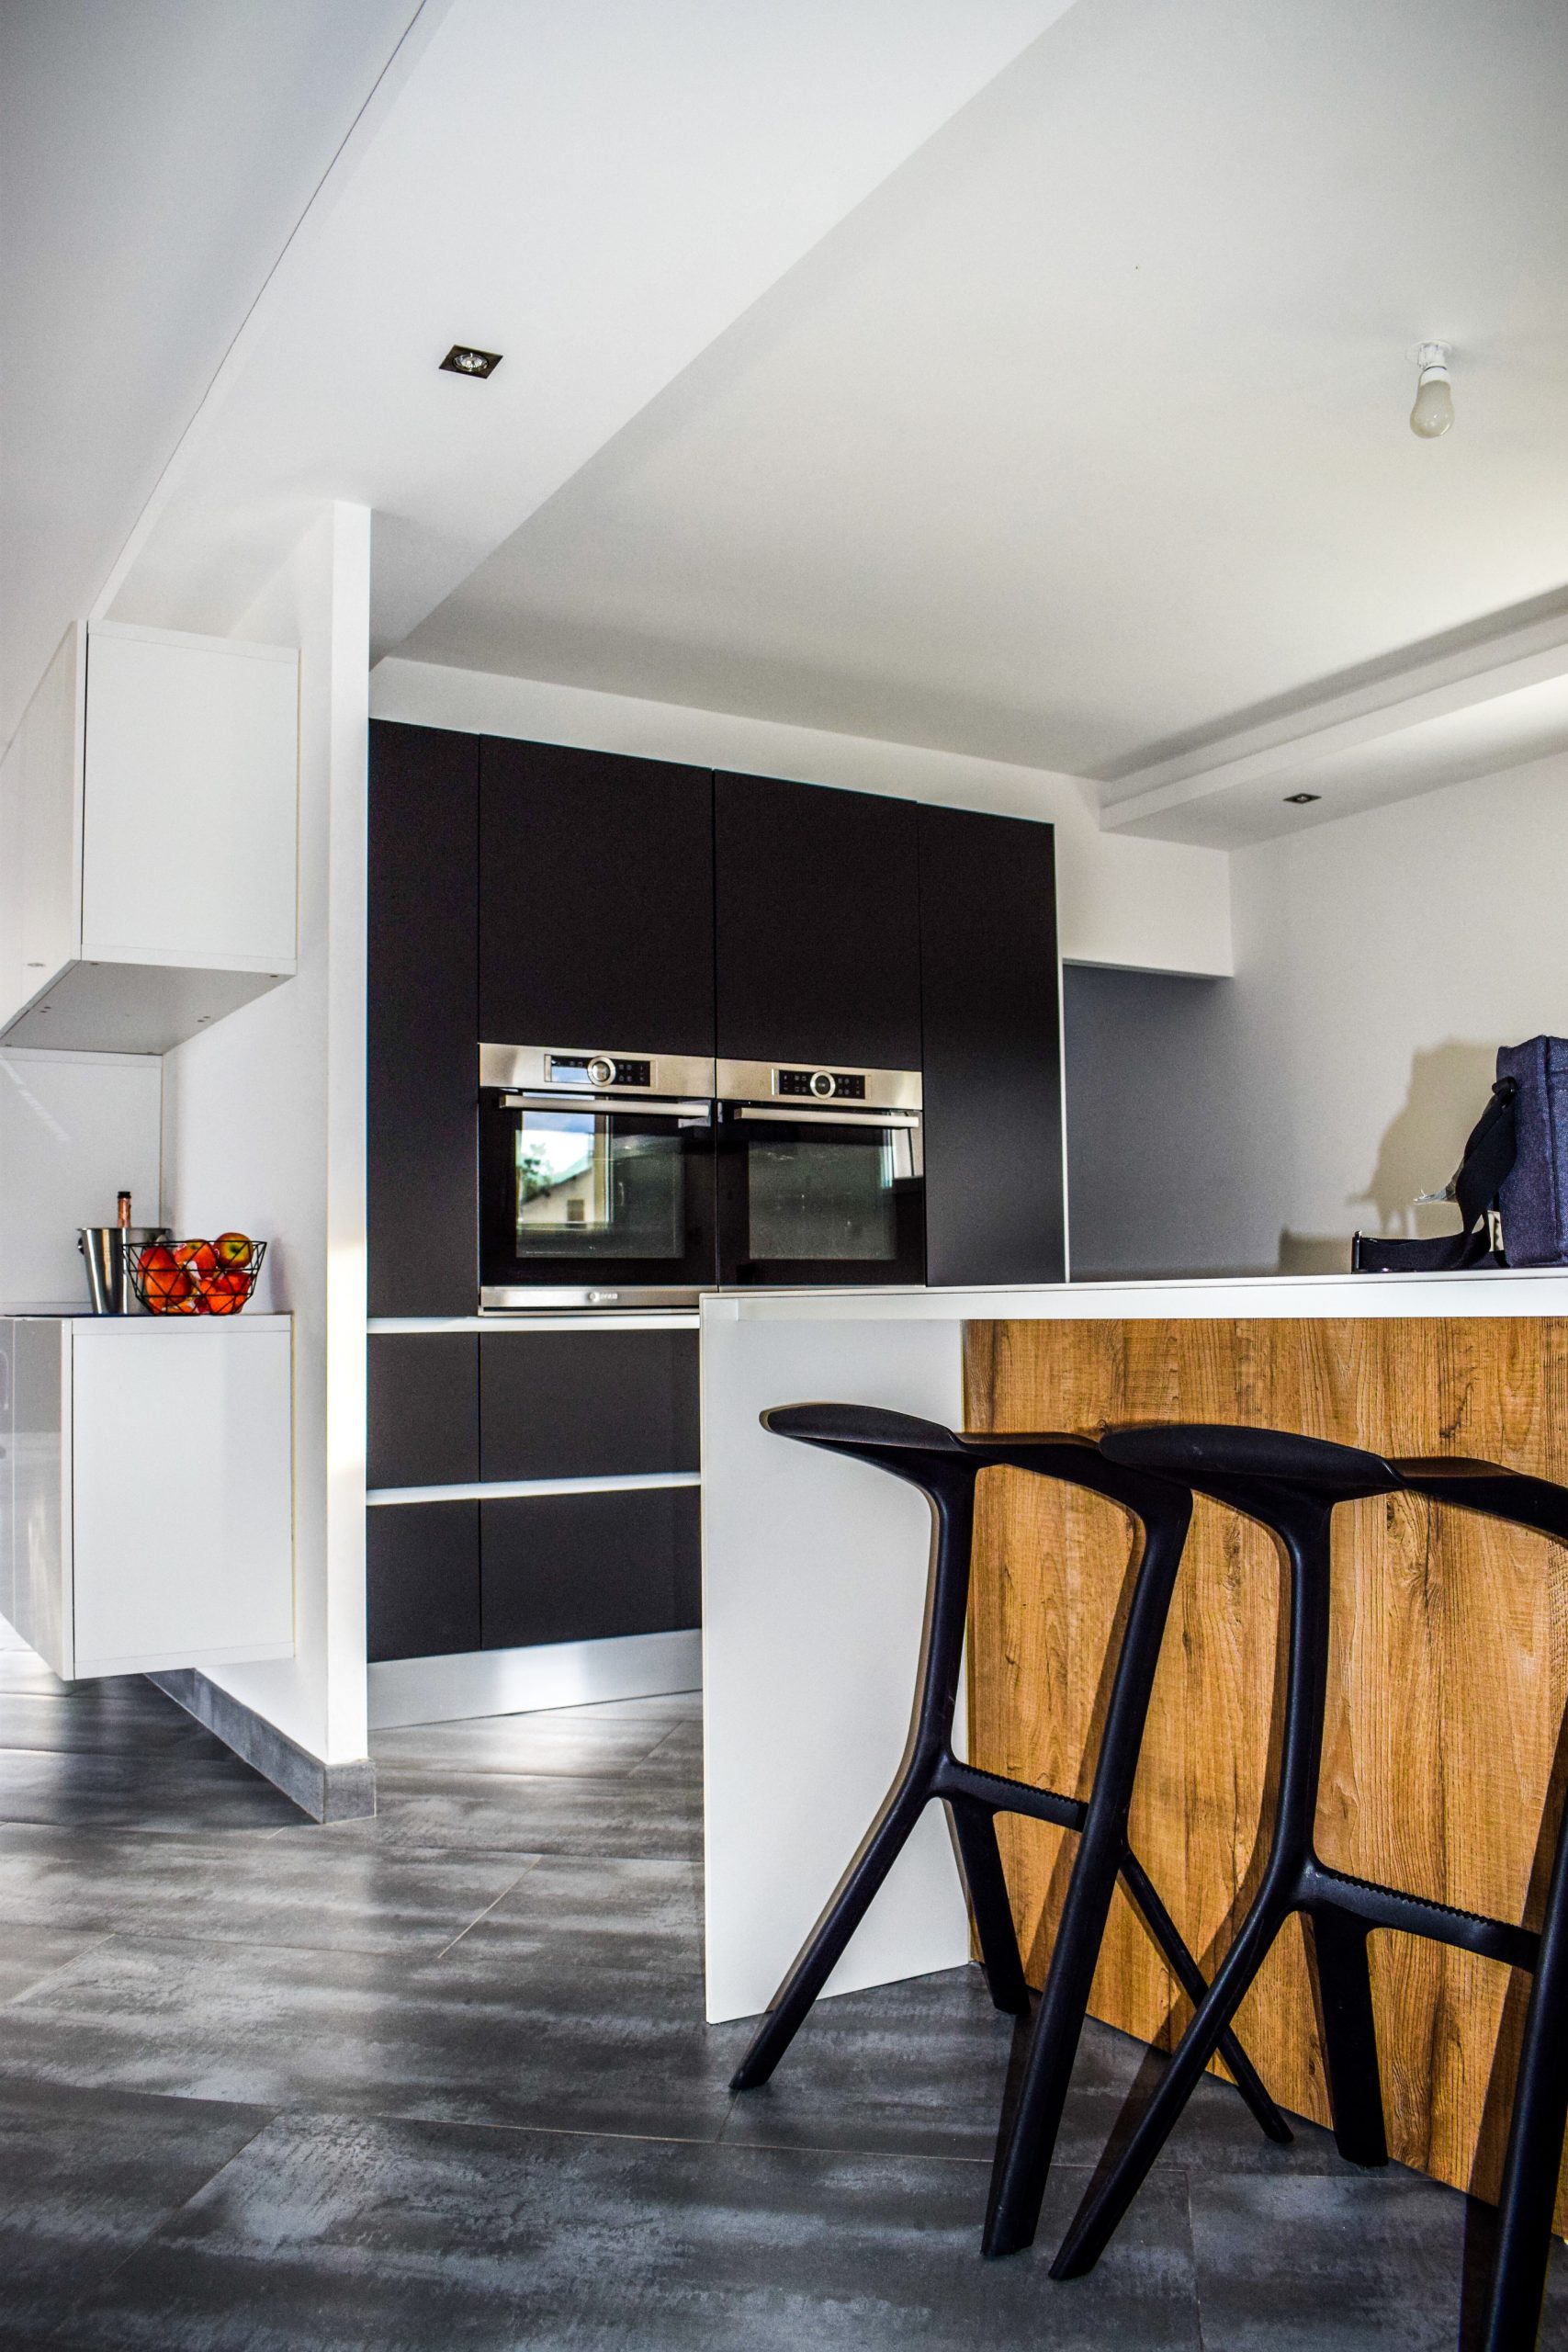 Remodeling Your Kitchen? Here’s Everything You Need to Know